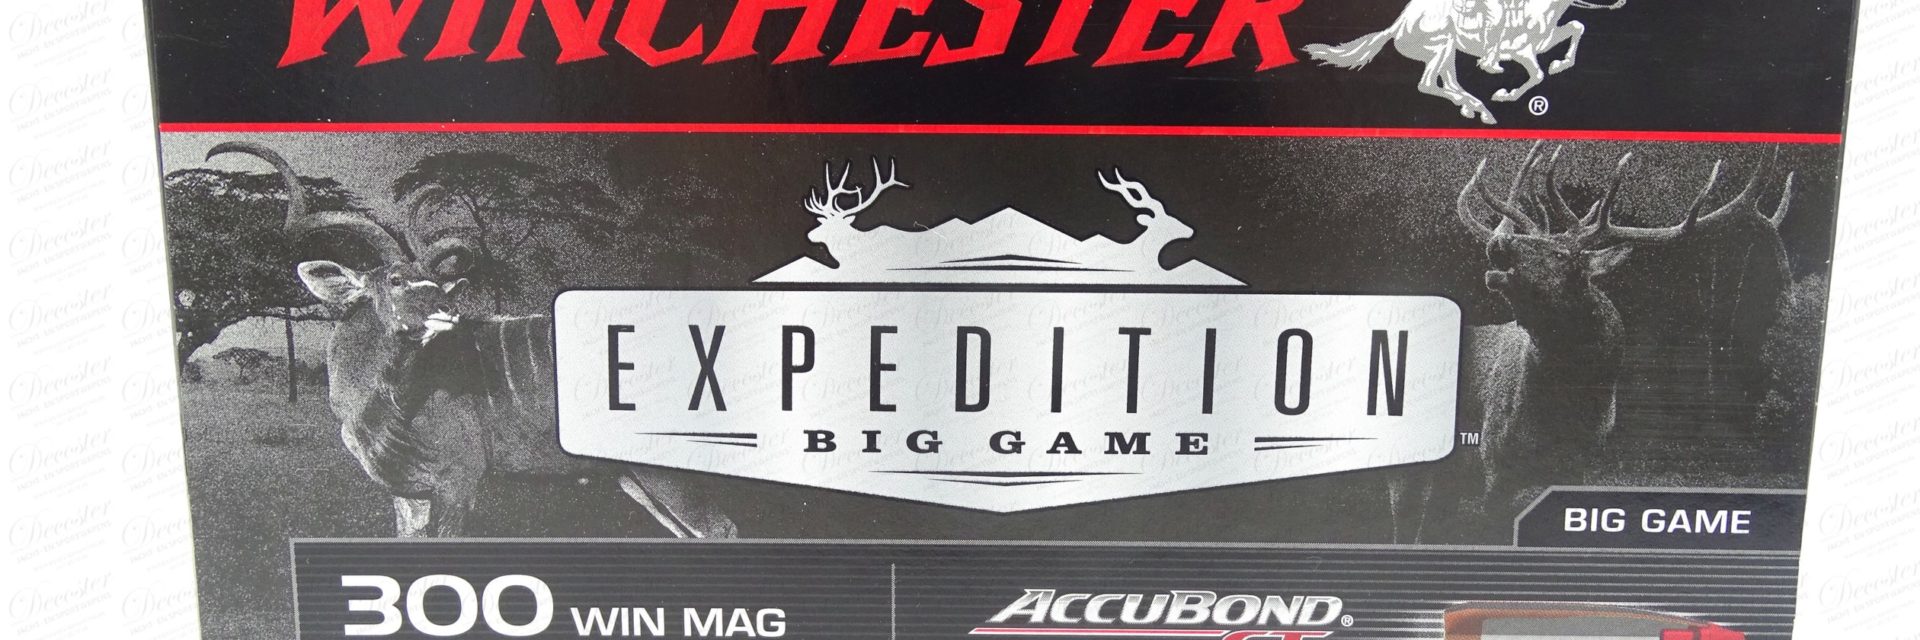 Winchester 300 Expedition BigGame